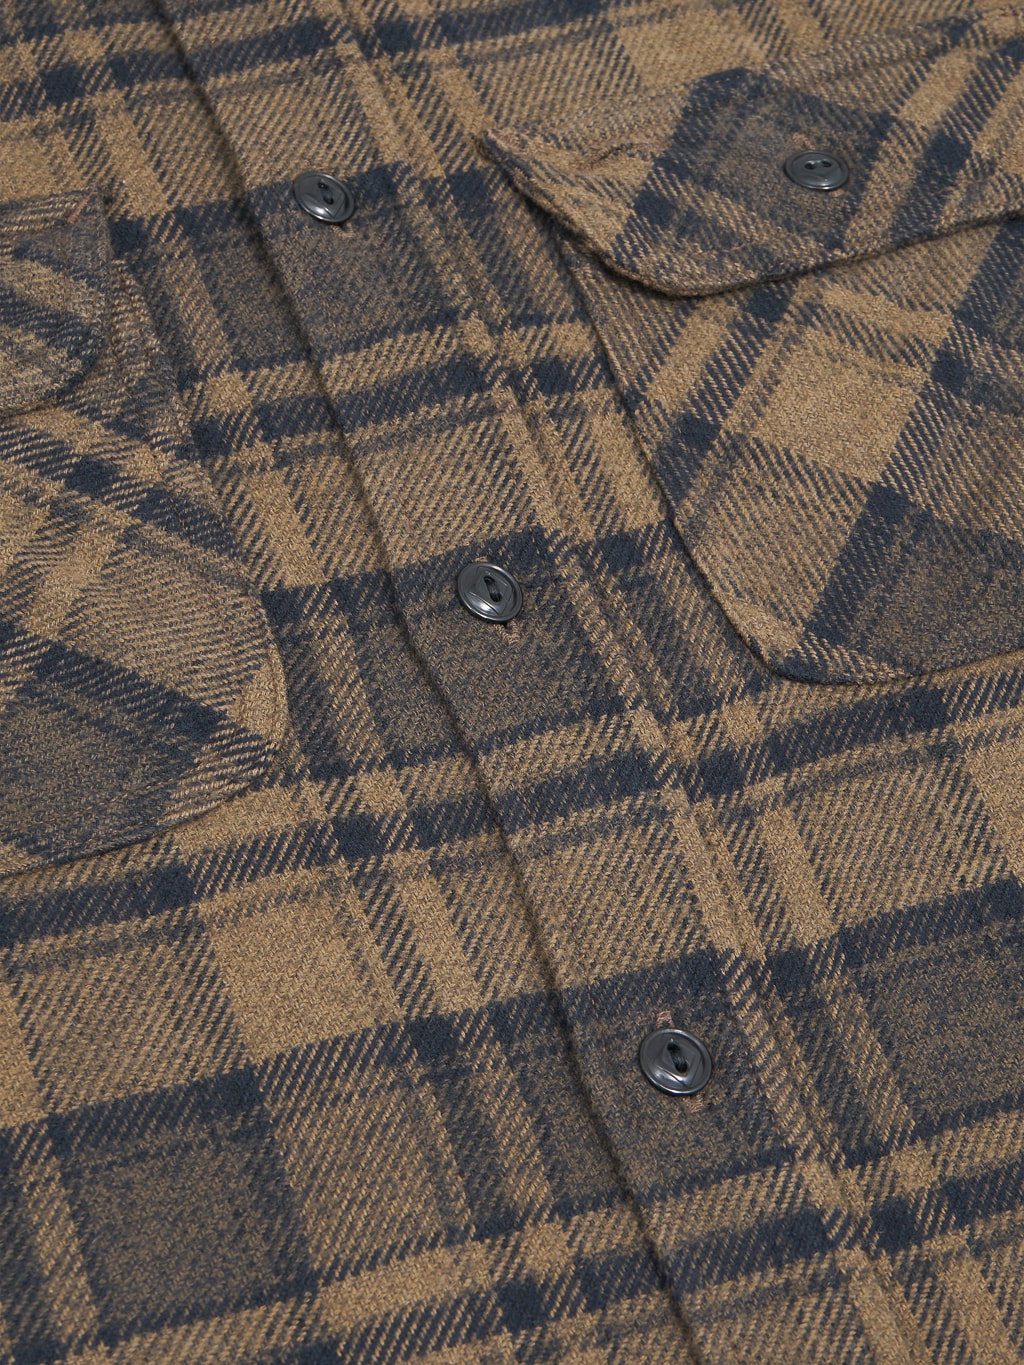 Fob Factory F3497 Nel Check Work flannel Shirt Brown fabric